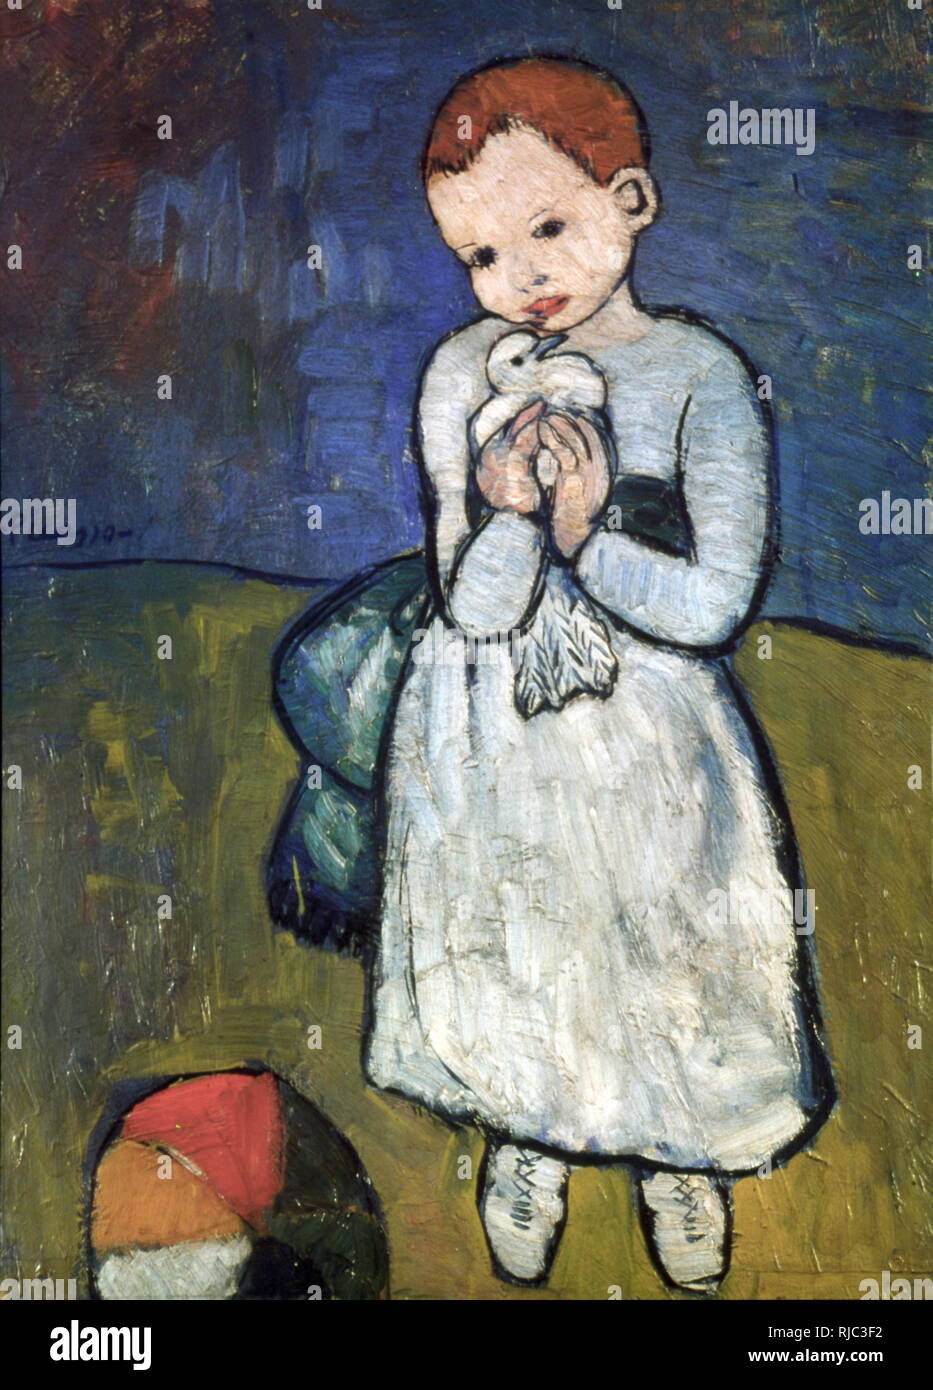 Child with a Dove (L'enfant au pigeon) 1901; painting by the Spanish artist Pablo Picasso, made at the start of his blue period. It was on public display in England for many years before its sale in 2012 Stock Photo